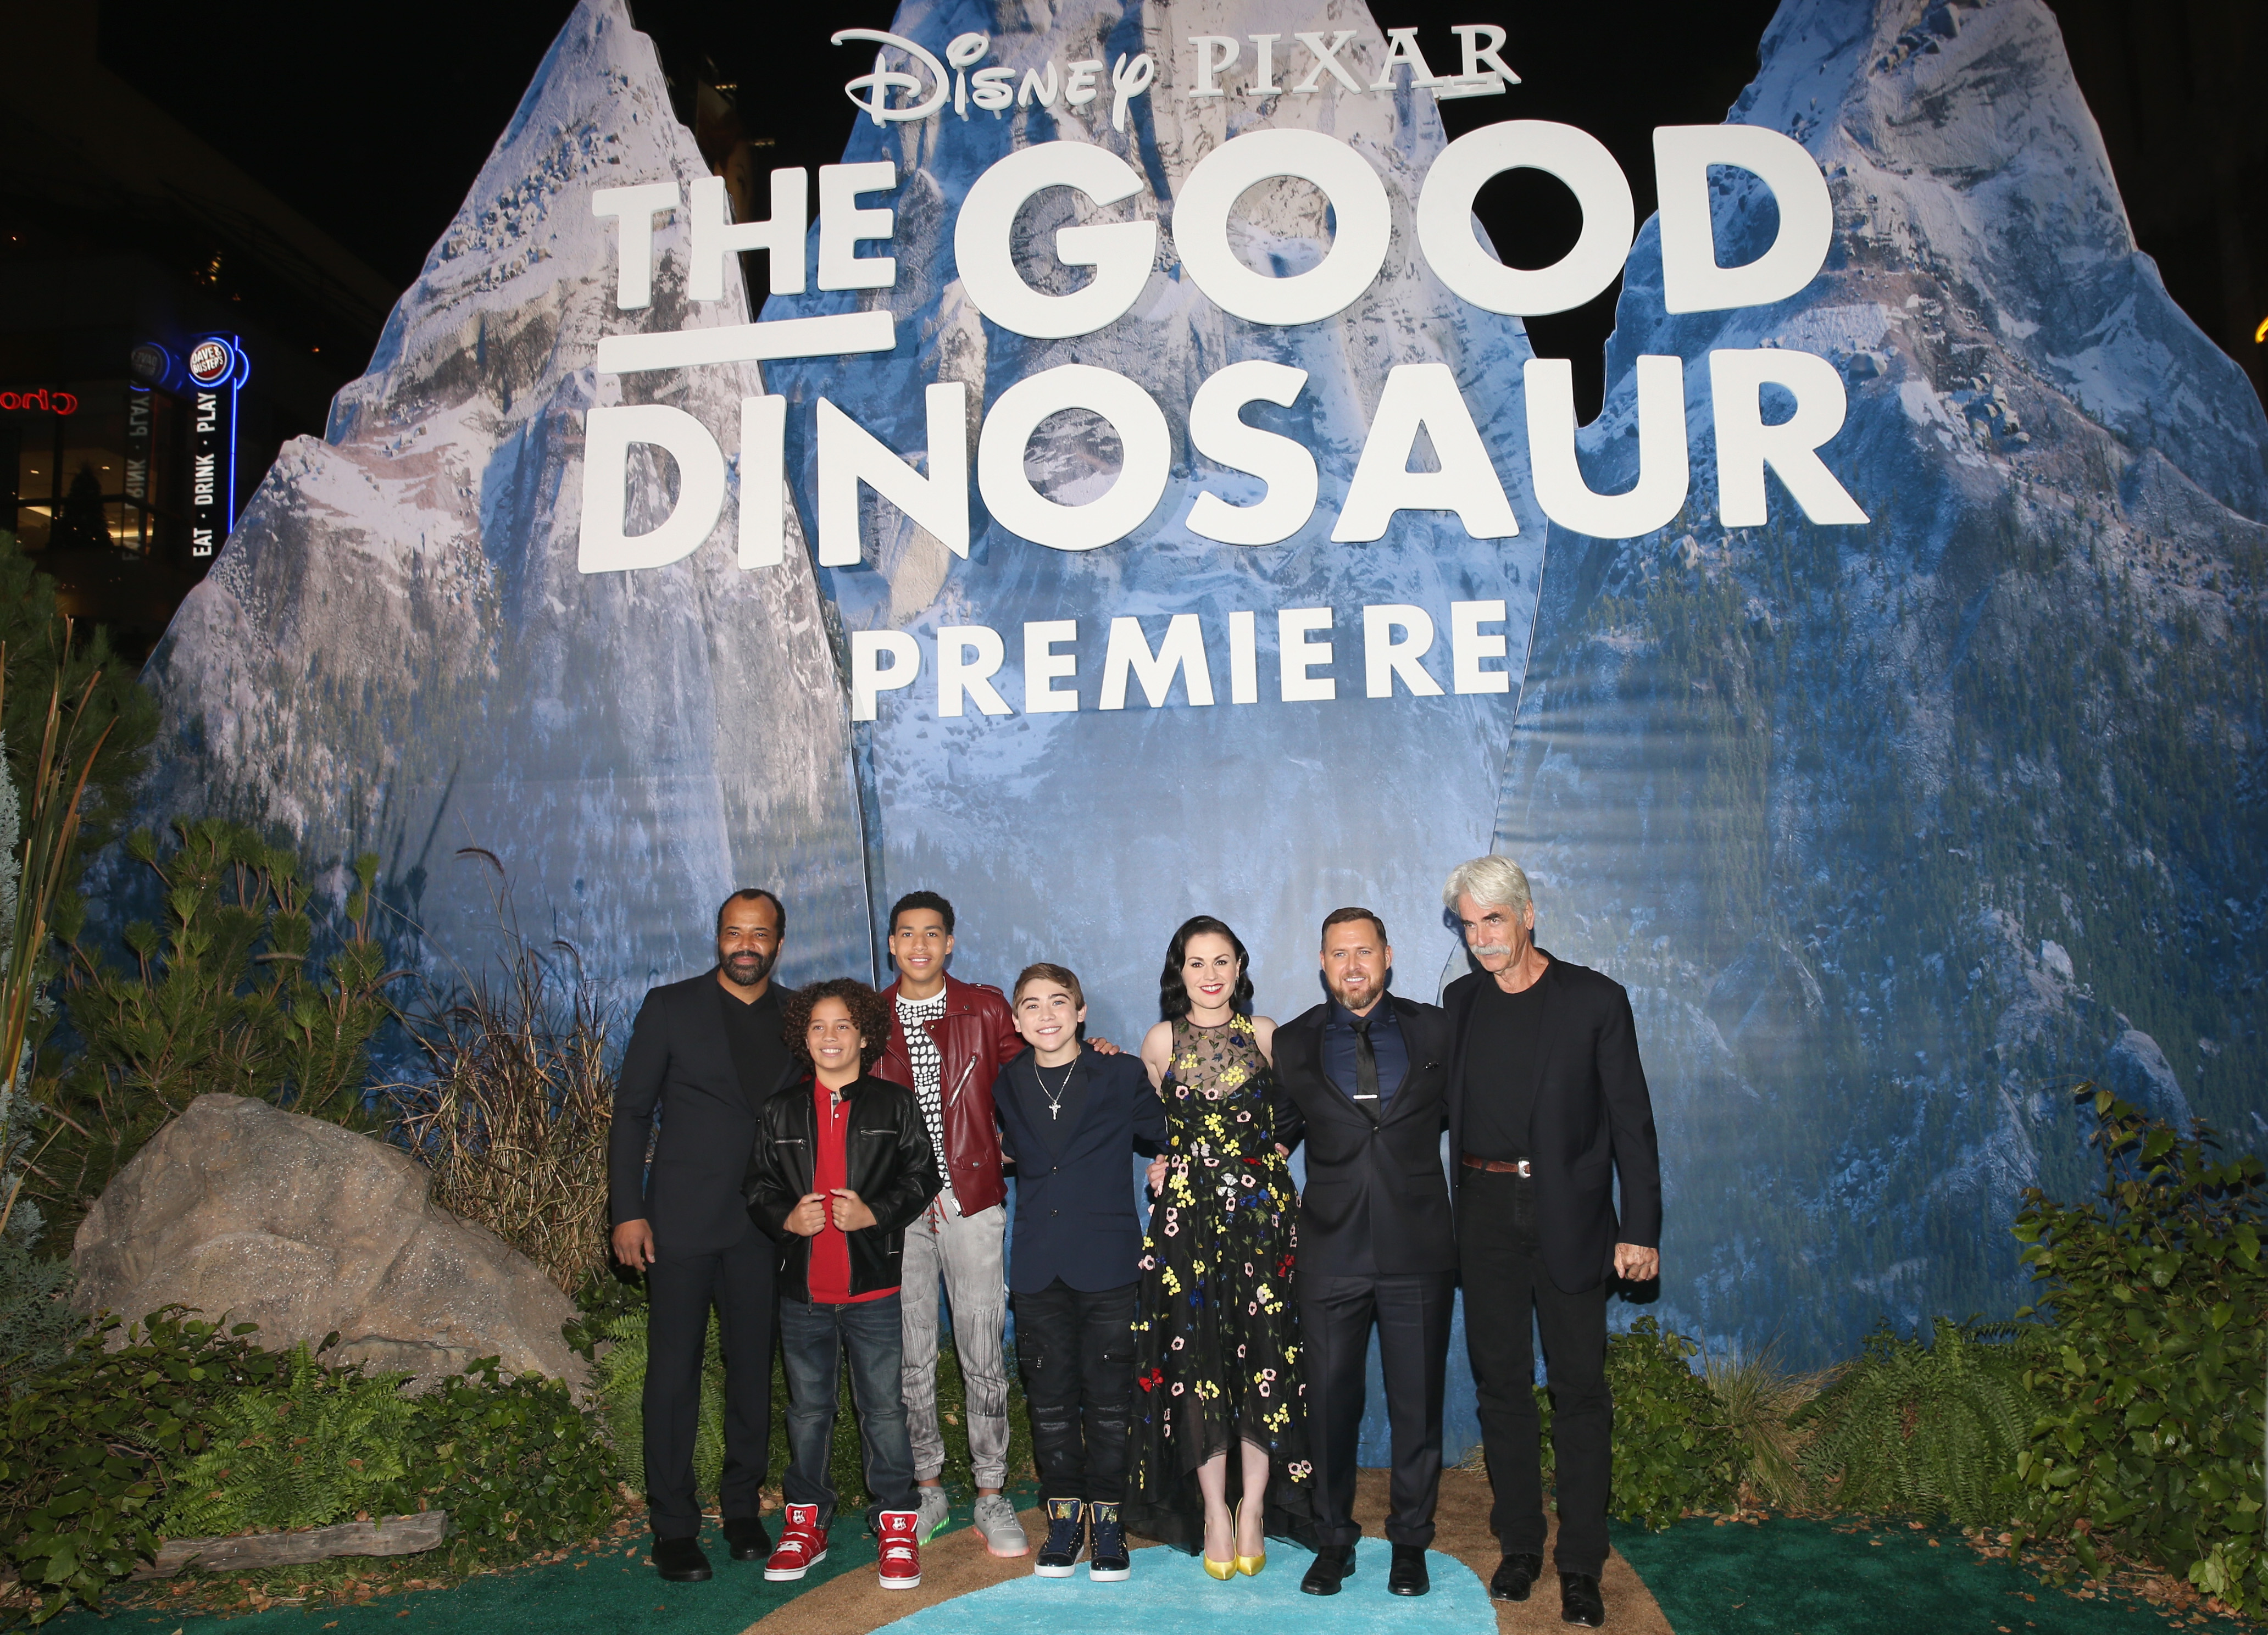 HOLLYWOOD, CA - NOVEMBER 17: Actors Jeffrey Wright, Jack Bright, Marcus Scribner, Raymond Ochoa, Anna Paquin, A.J. Buckley, and Sam Elliott attend the World Premiere Of Disney-Pixar's THE GOOD DINOSAUR at the El Capitan Theatre on November 17, 2015 in Hollywood, California. (Photo by Jesse Grant/Getty Images for Disney) *** Local Caption *** Jeffrey Wright; Raymond Ochoa; Sam Elliott; Jack Bright; Marcus Scribner; Anna Paquin; A.J. Buckley